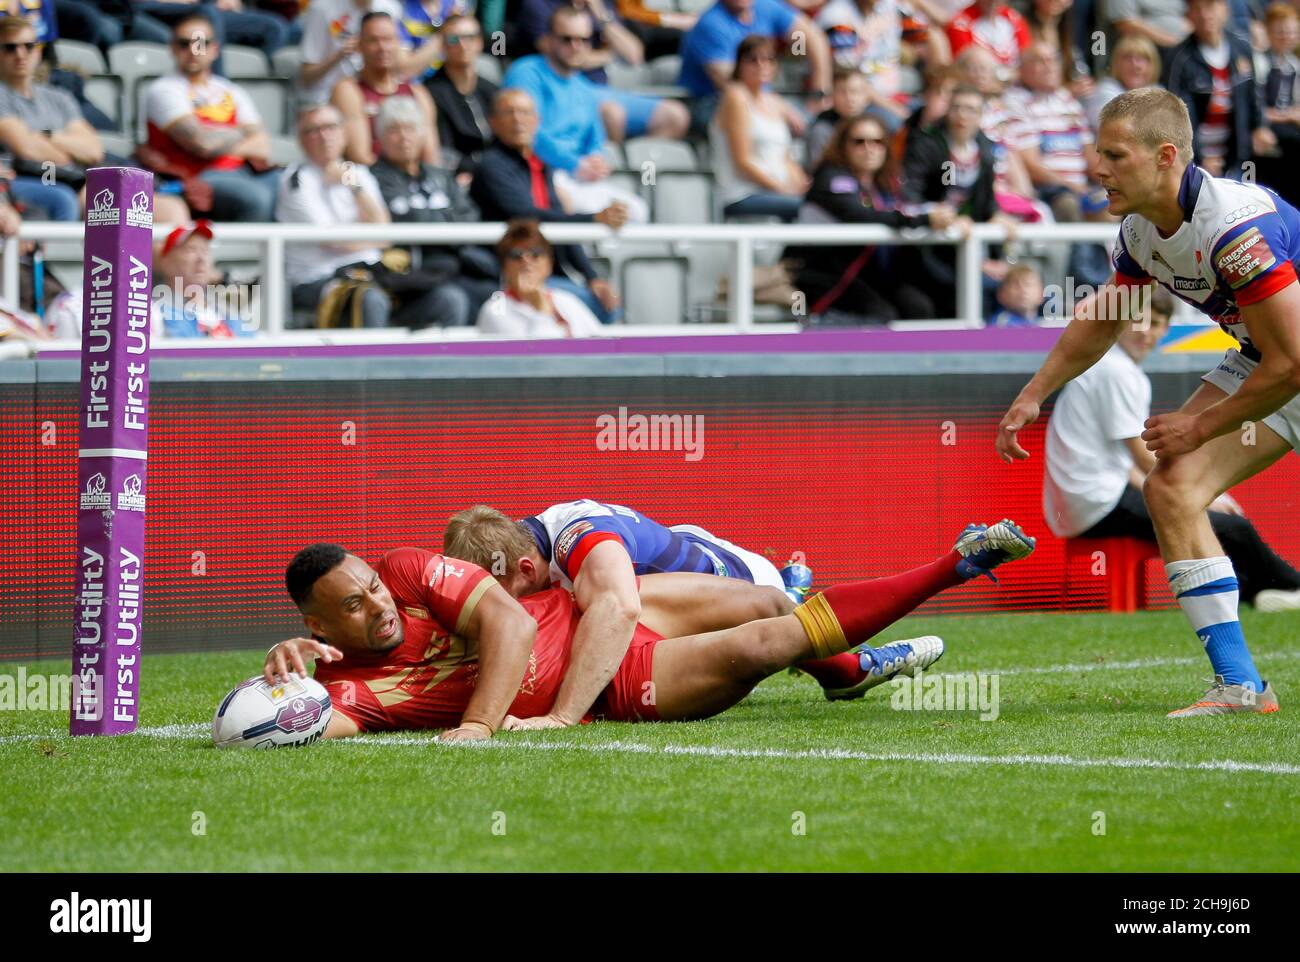 Catalan Dragons' Jodie Broughton scores his 2nd try during the Dacia Magic Weekend match at St James' Park, Newcastle. Stock Photo